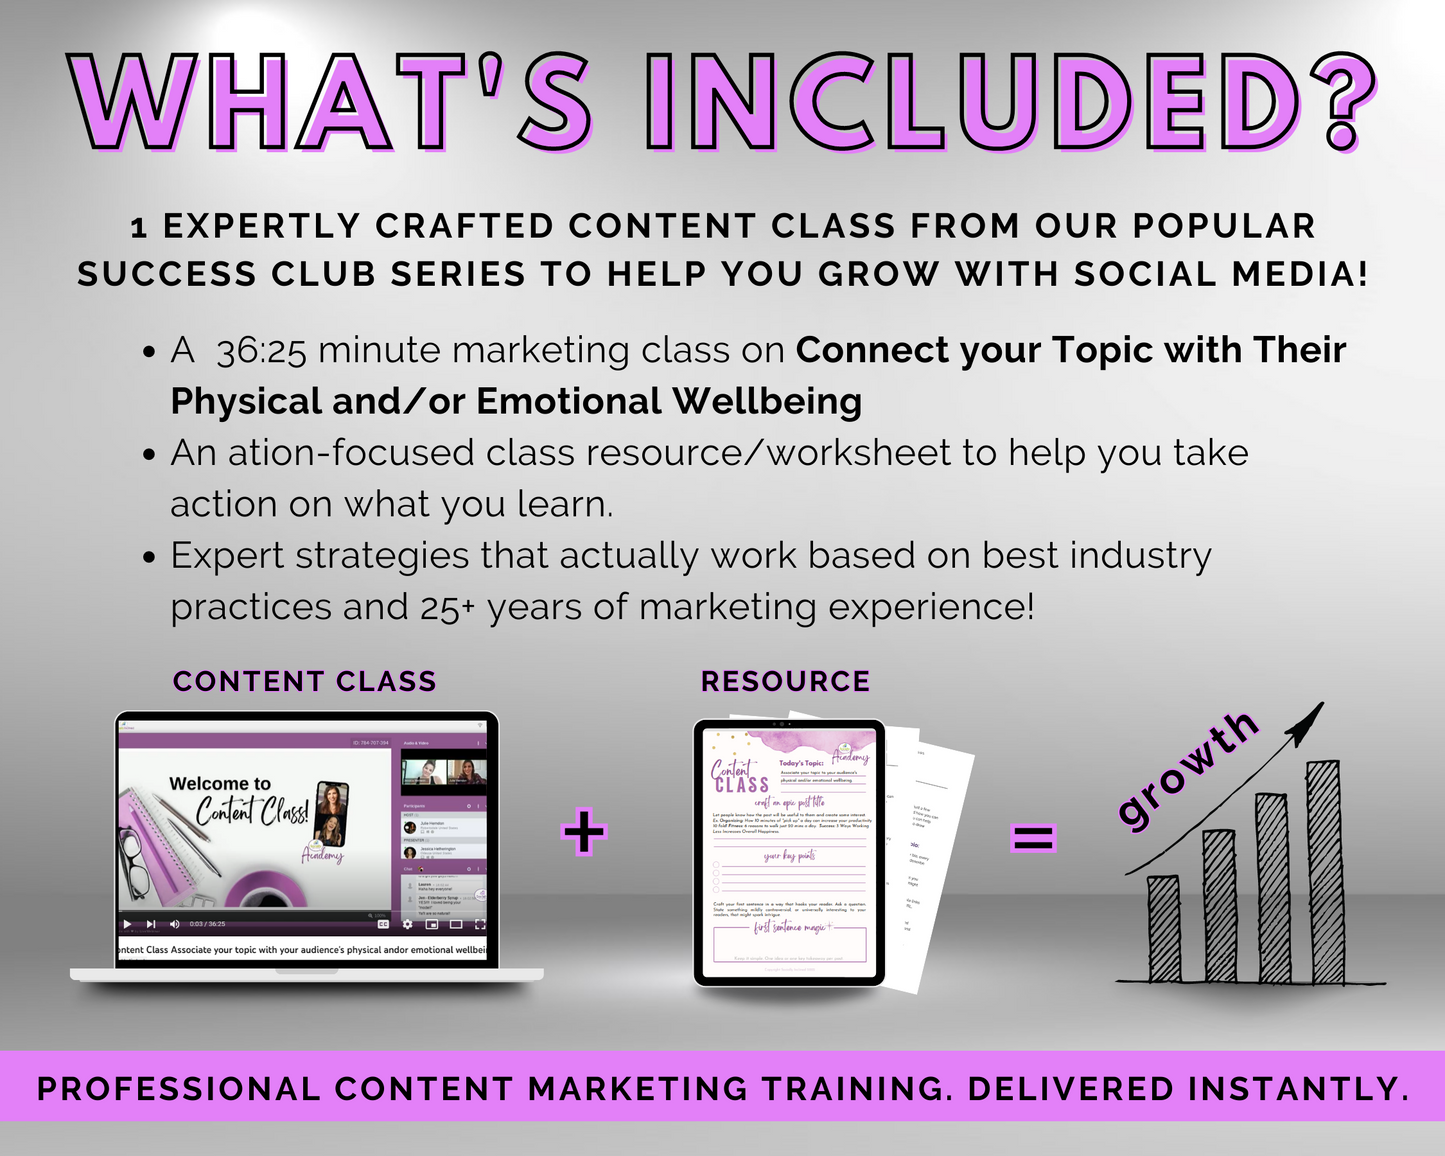 Content Class - Connect your Topic with Their Physical and/or Emotional Wellbeing Masterclass